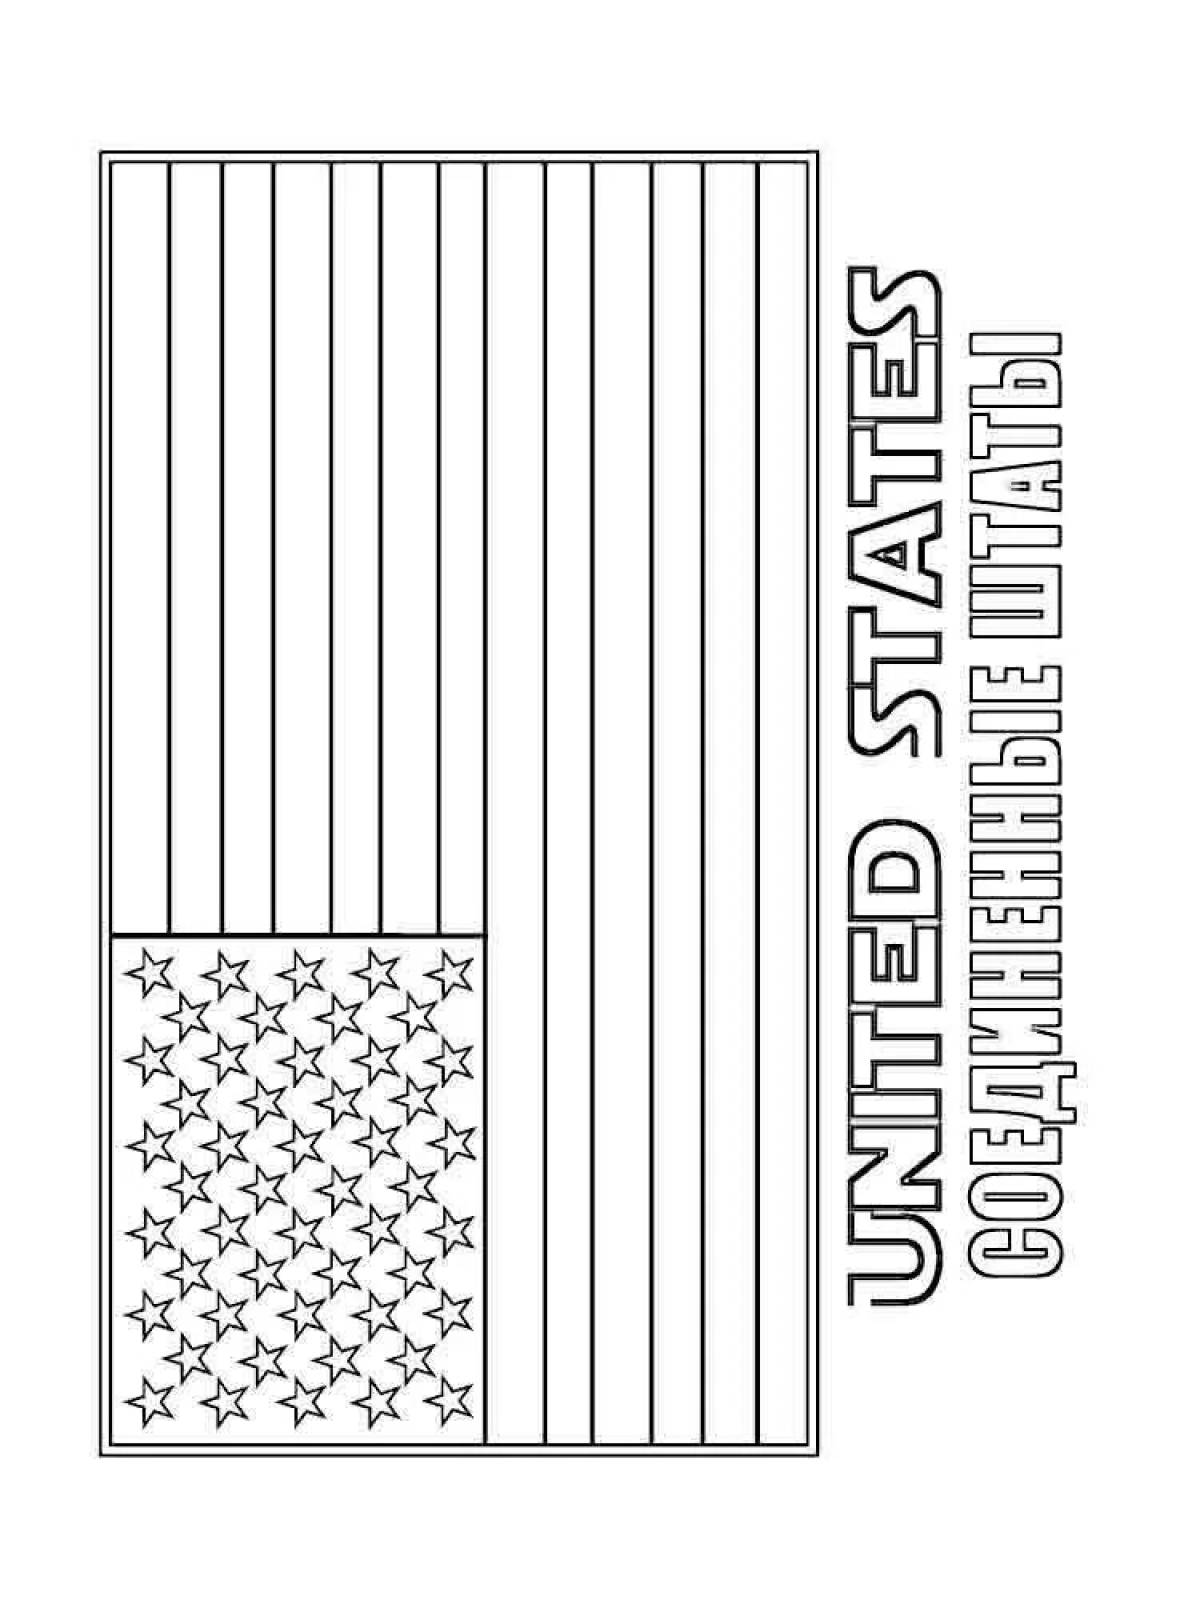 Tempting rb flag coloring page